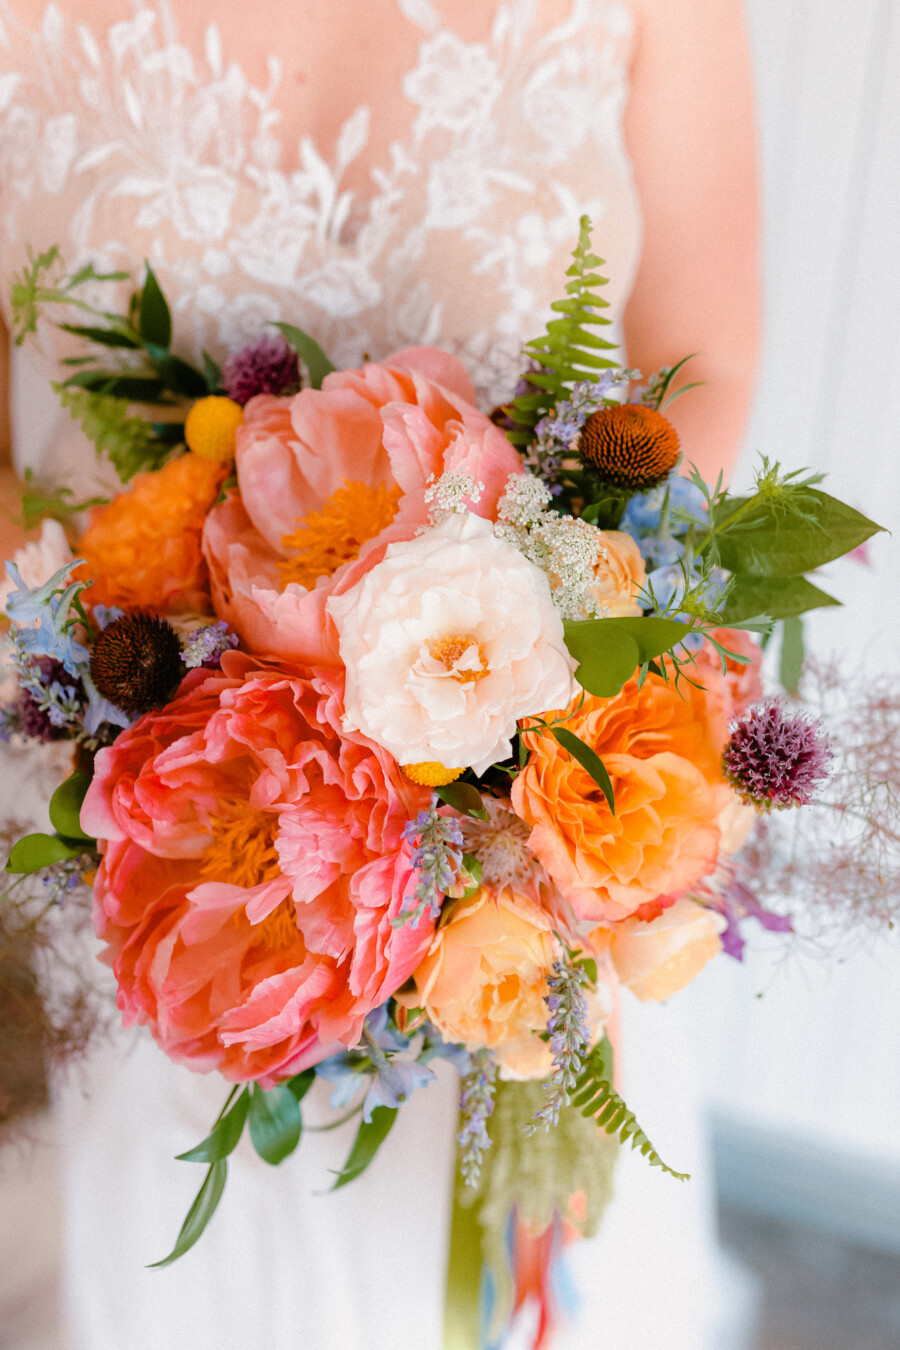 Whimsical wedding flowers by LMA Designs